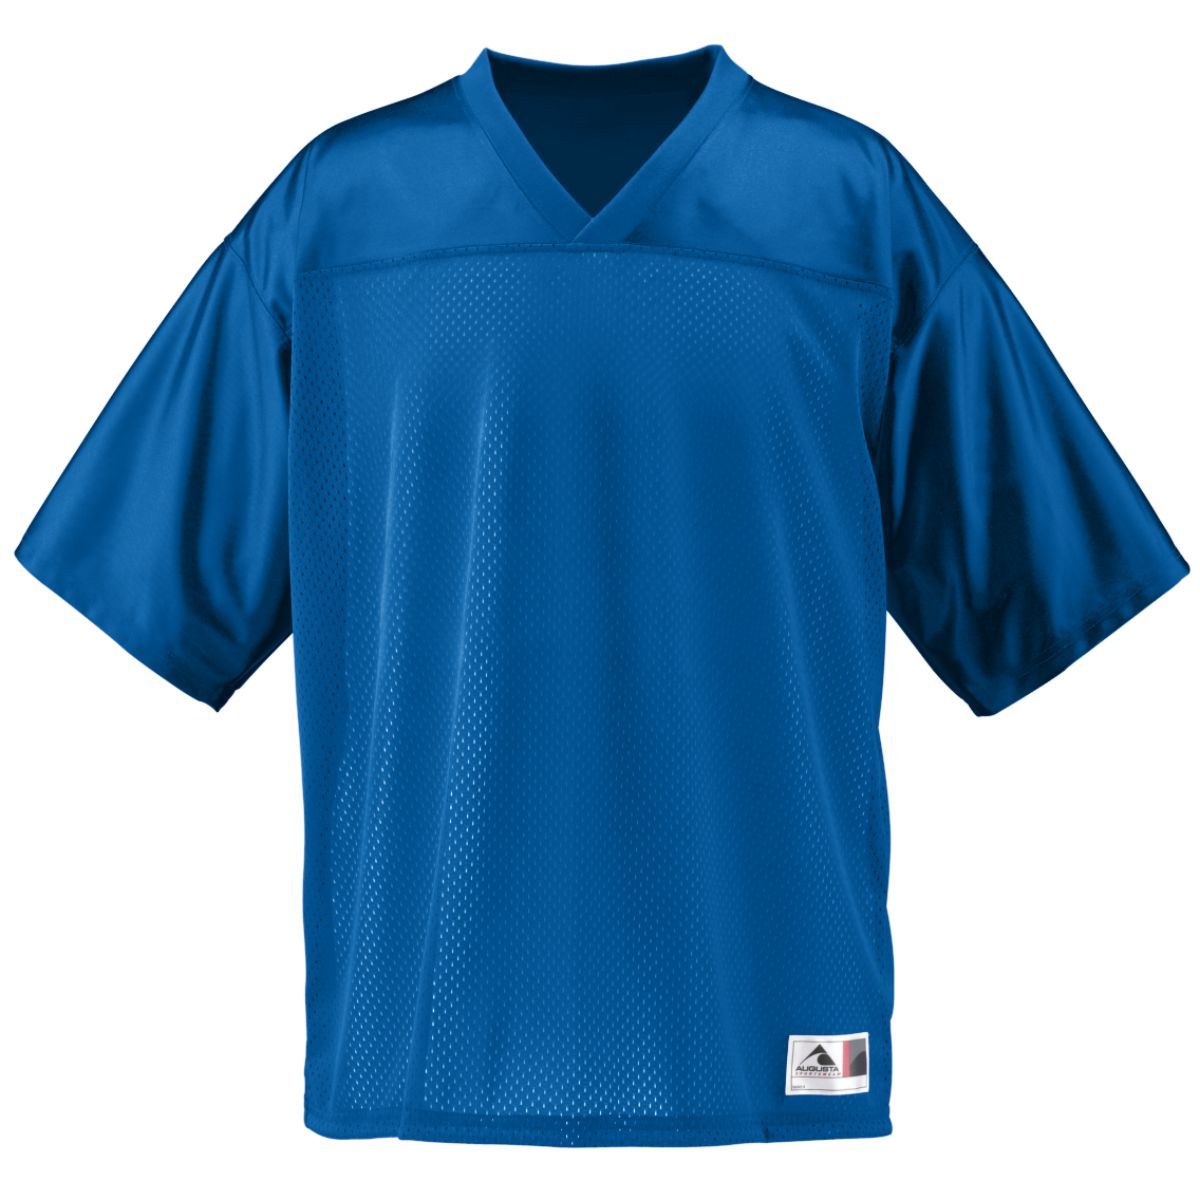 Augusta Sportswear Youth Stadium Replica Jersey in Royal  -Part of the Youth, Youth-Jersey, Augusta-Products, Football, Shirts, All-Sports, All-Sports-1 product lines at KanaleyCreations.com